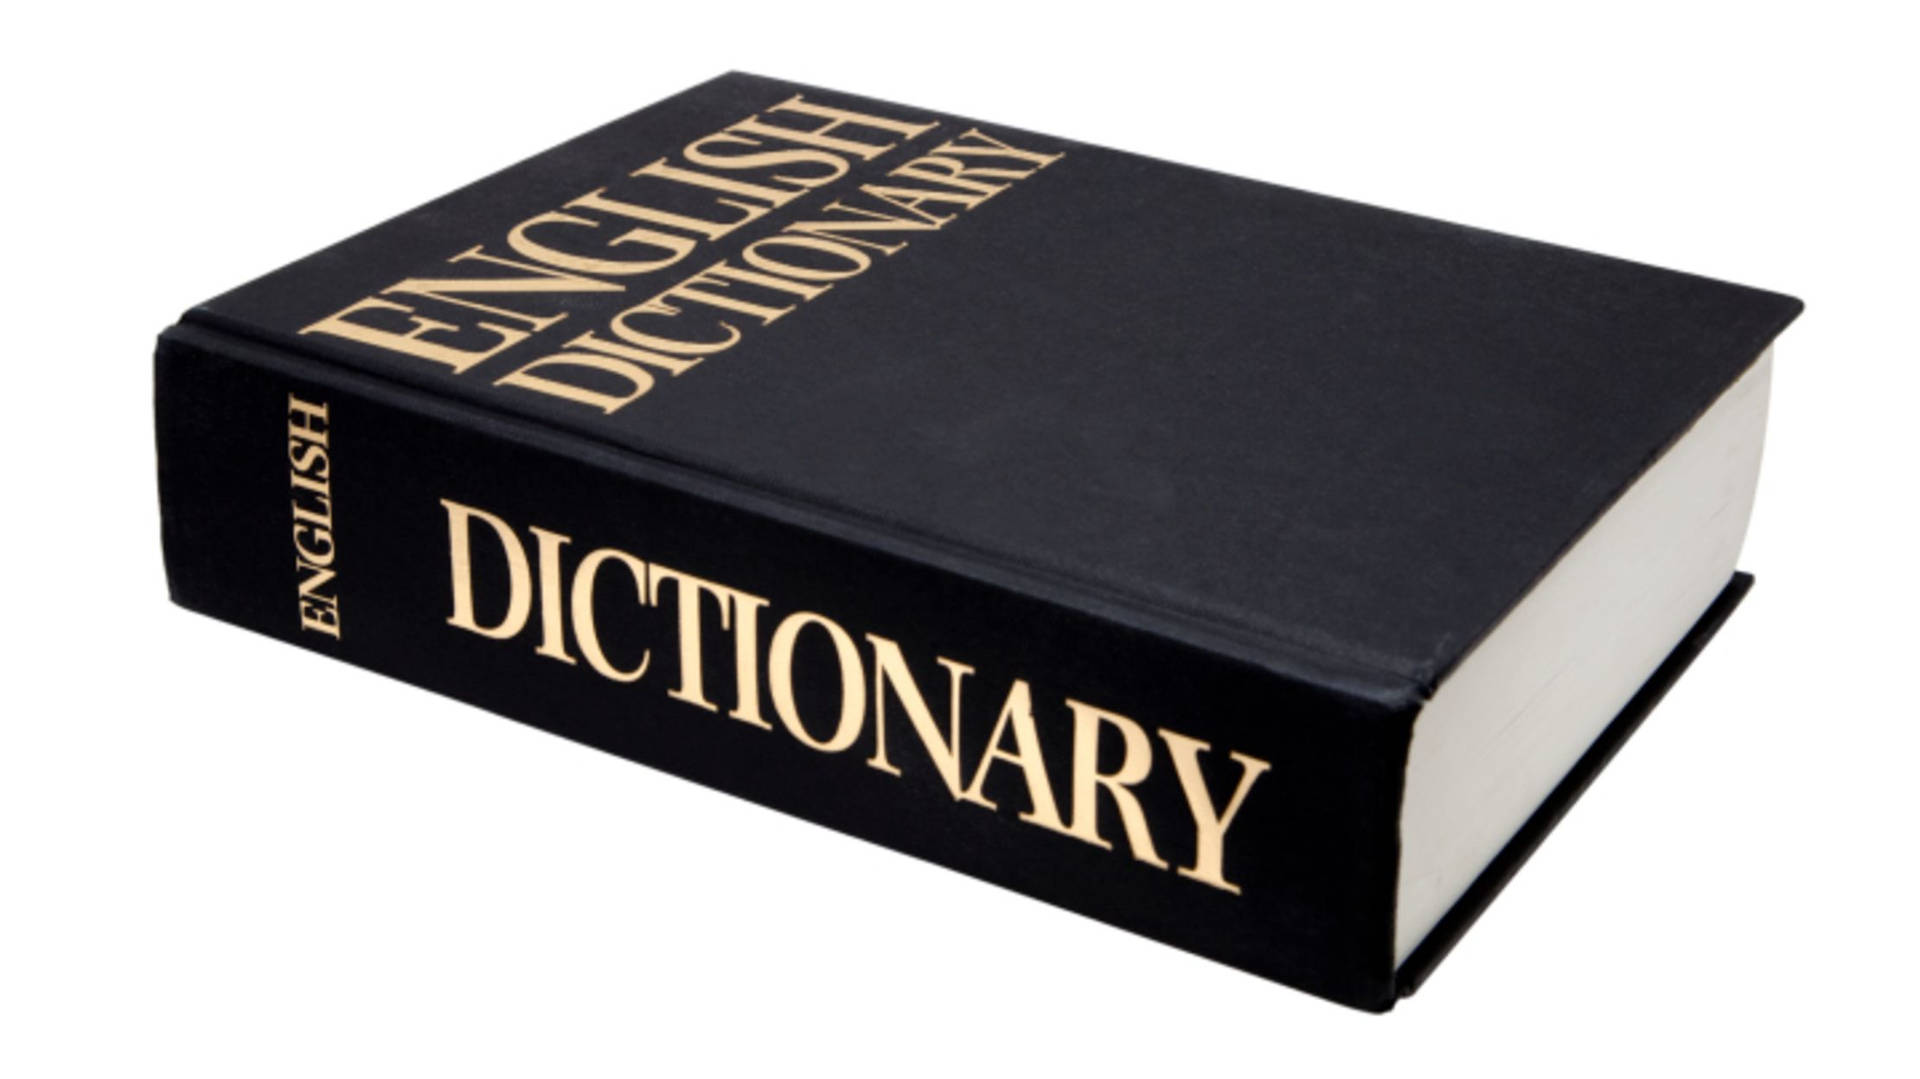 Black English Dictionary Book Background